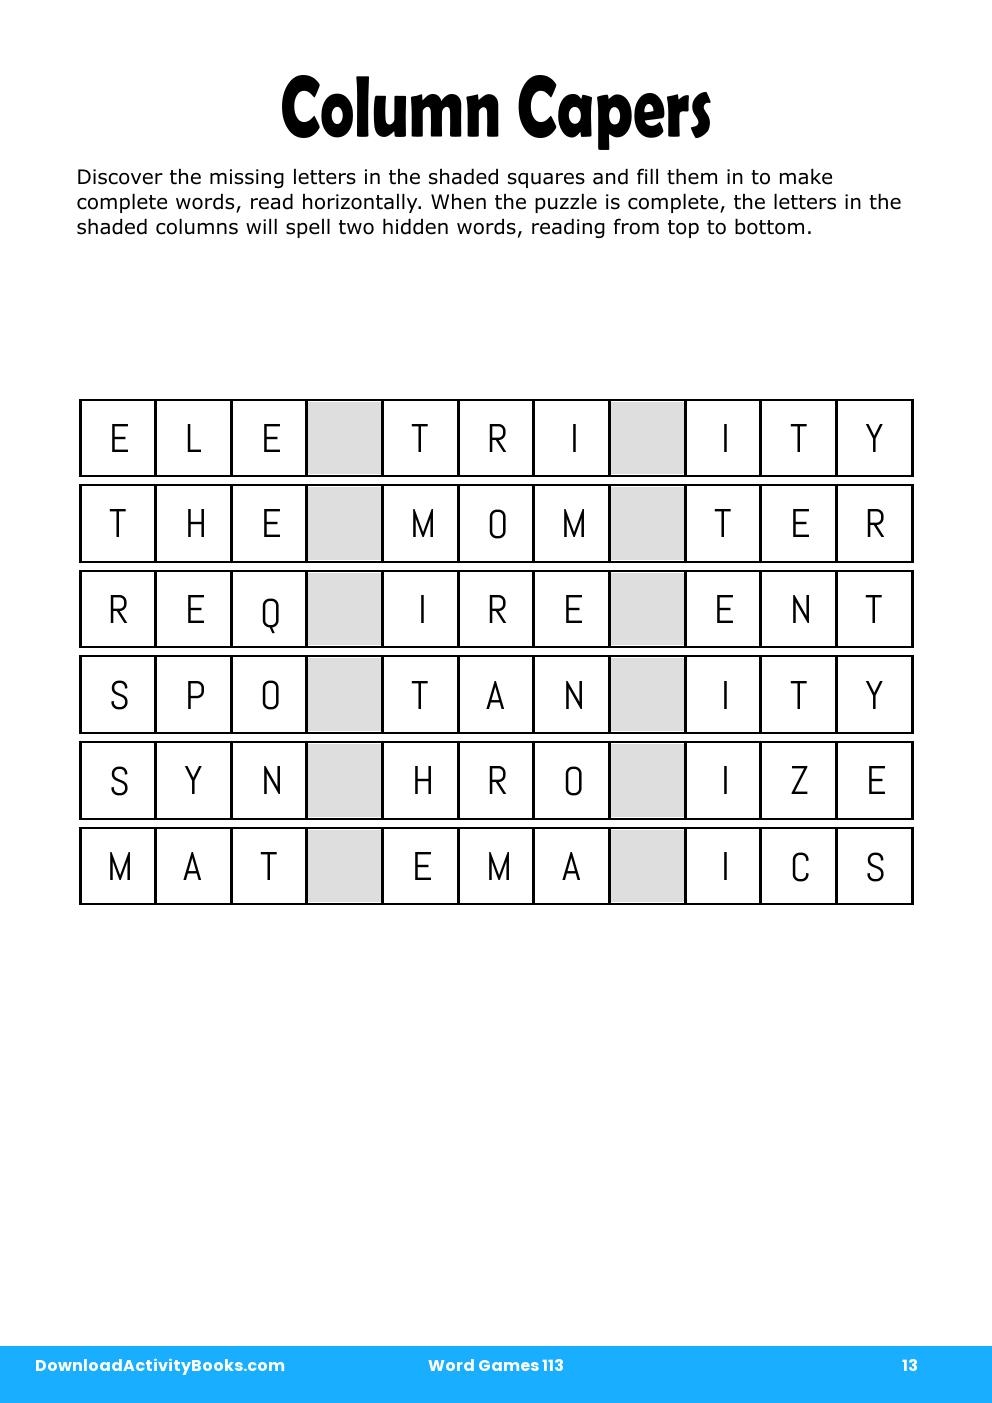 Column Capers in Word Games 113